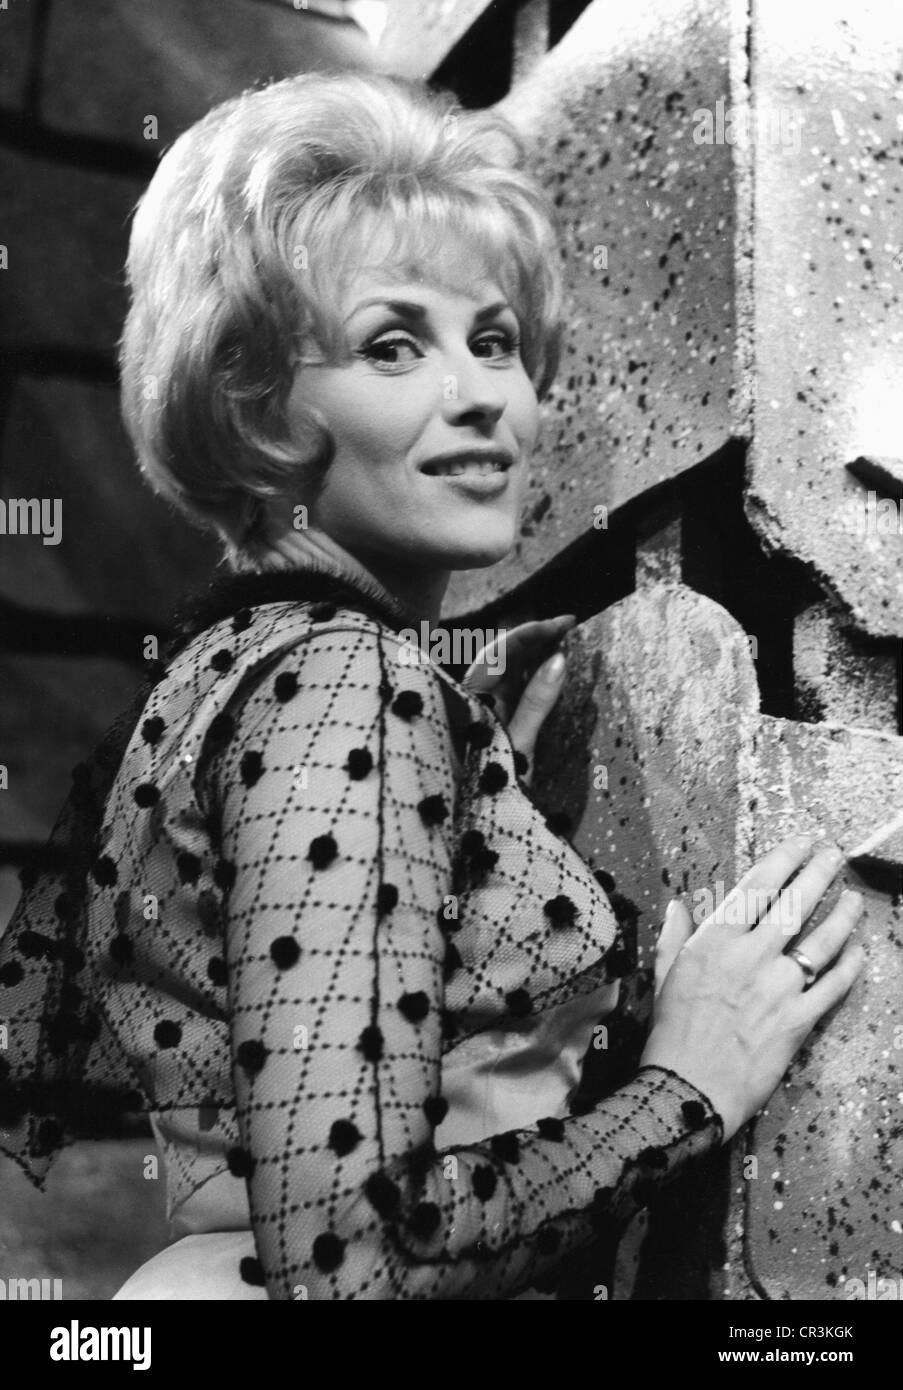 Johns, Bibi, * 21.1.1929, Swedish singer and actress, half length, to the TV show 'Musik aus Studio B', with the song: 'Sag, was willst du finden', 1966, Stock Photo